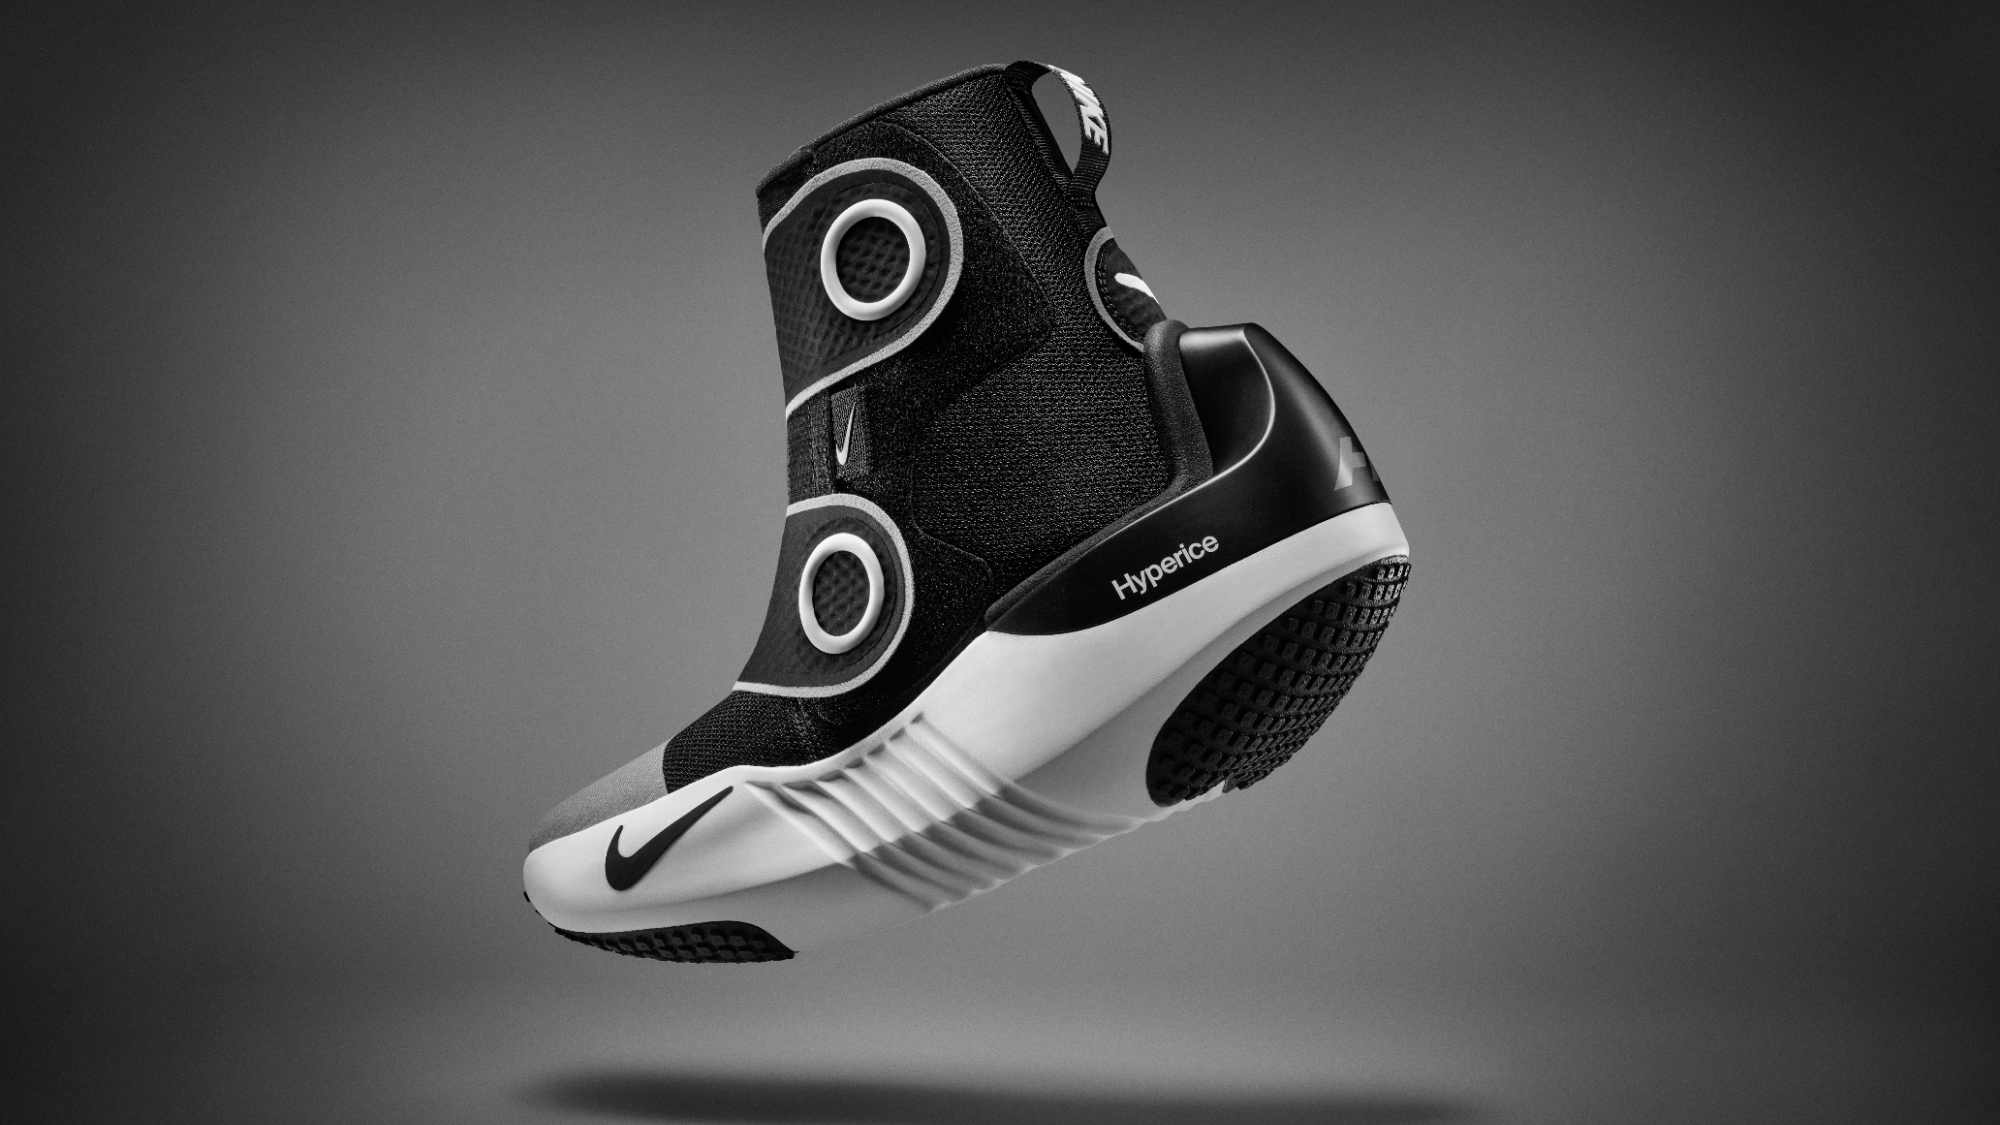 The Nike x Hyperice tech-enabled boots 